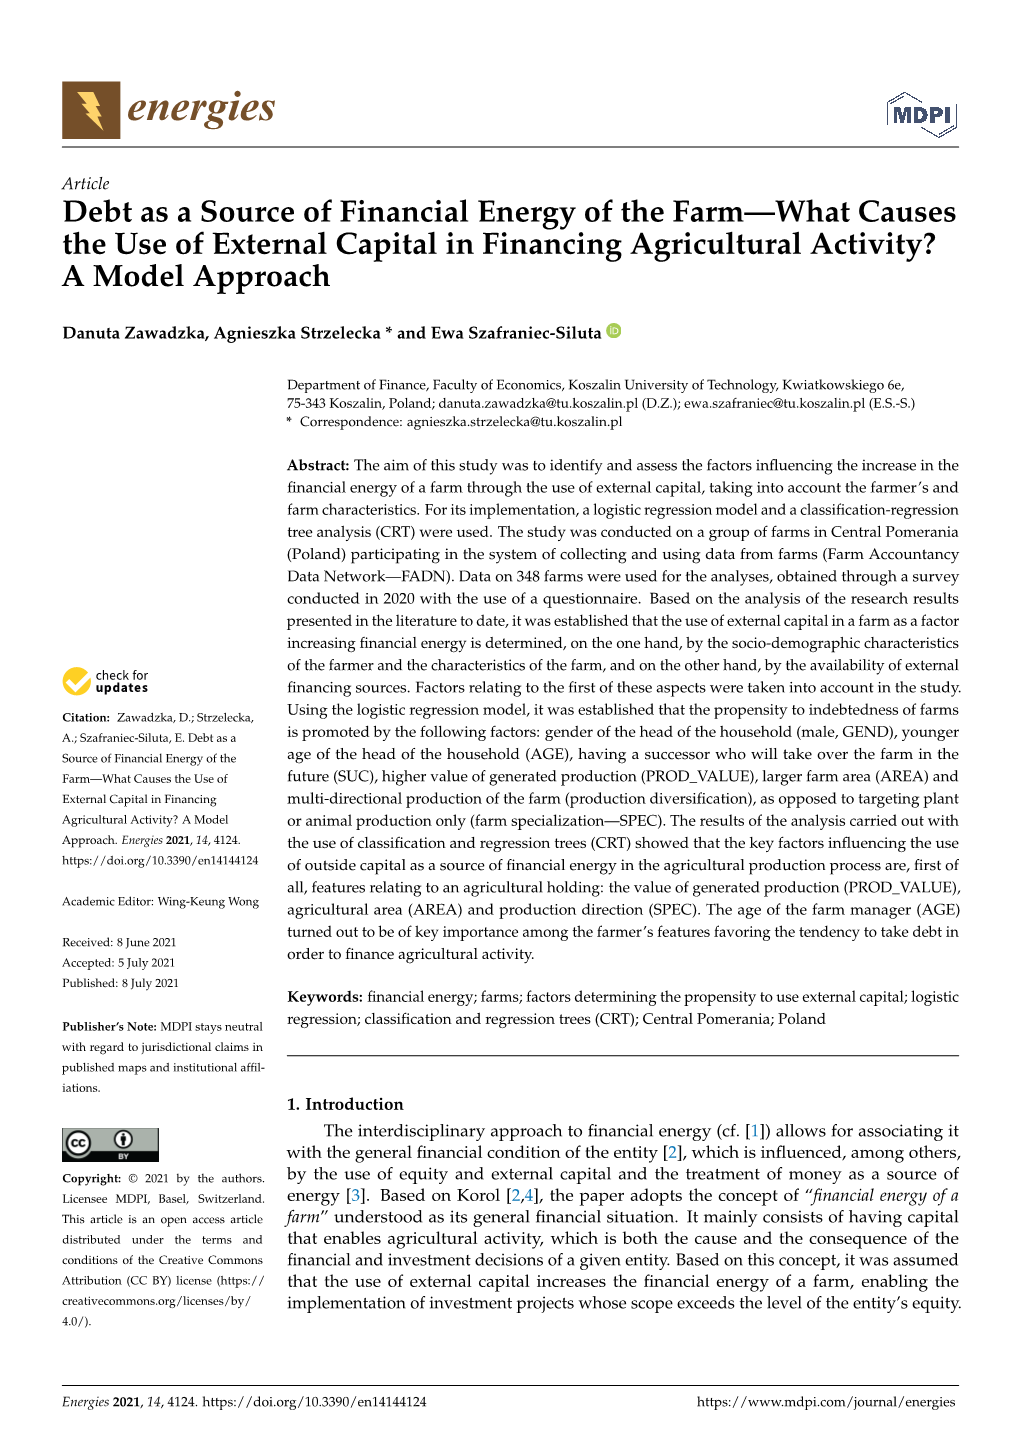 Debt As a Source of Financial Energy of the Farm—What Causes the Use of External Capital in Financing Agricultural Activity? a Model Approach